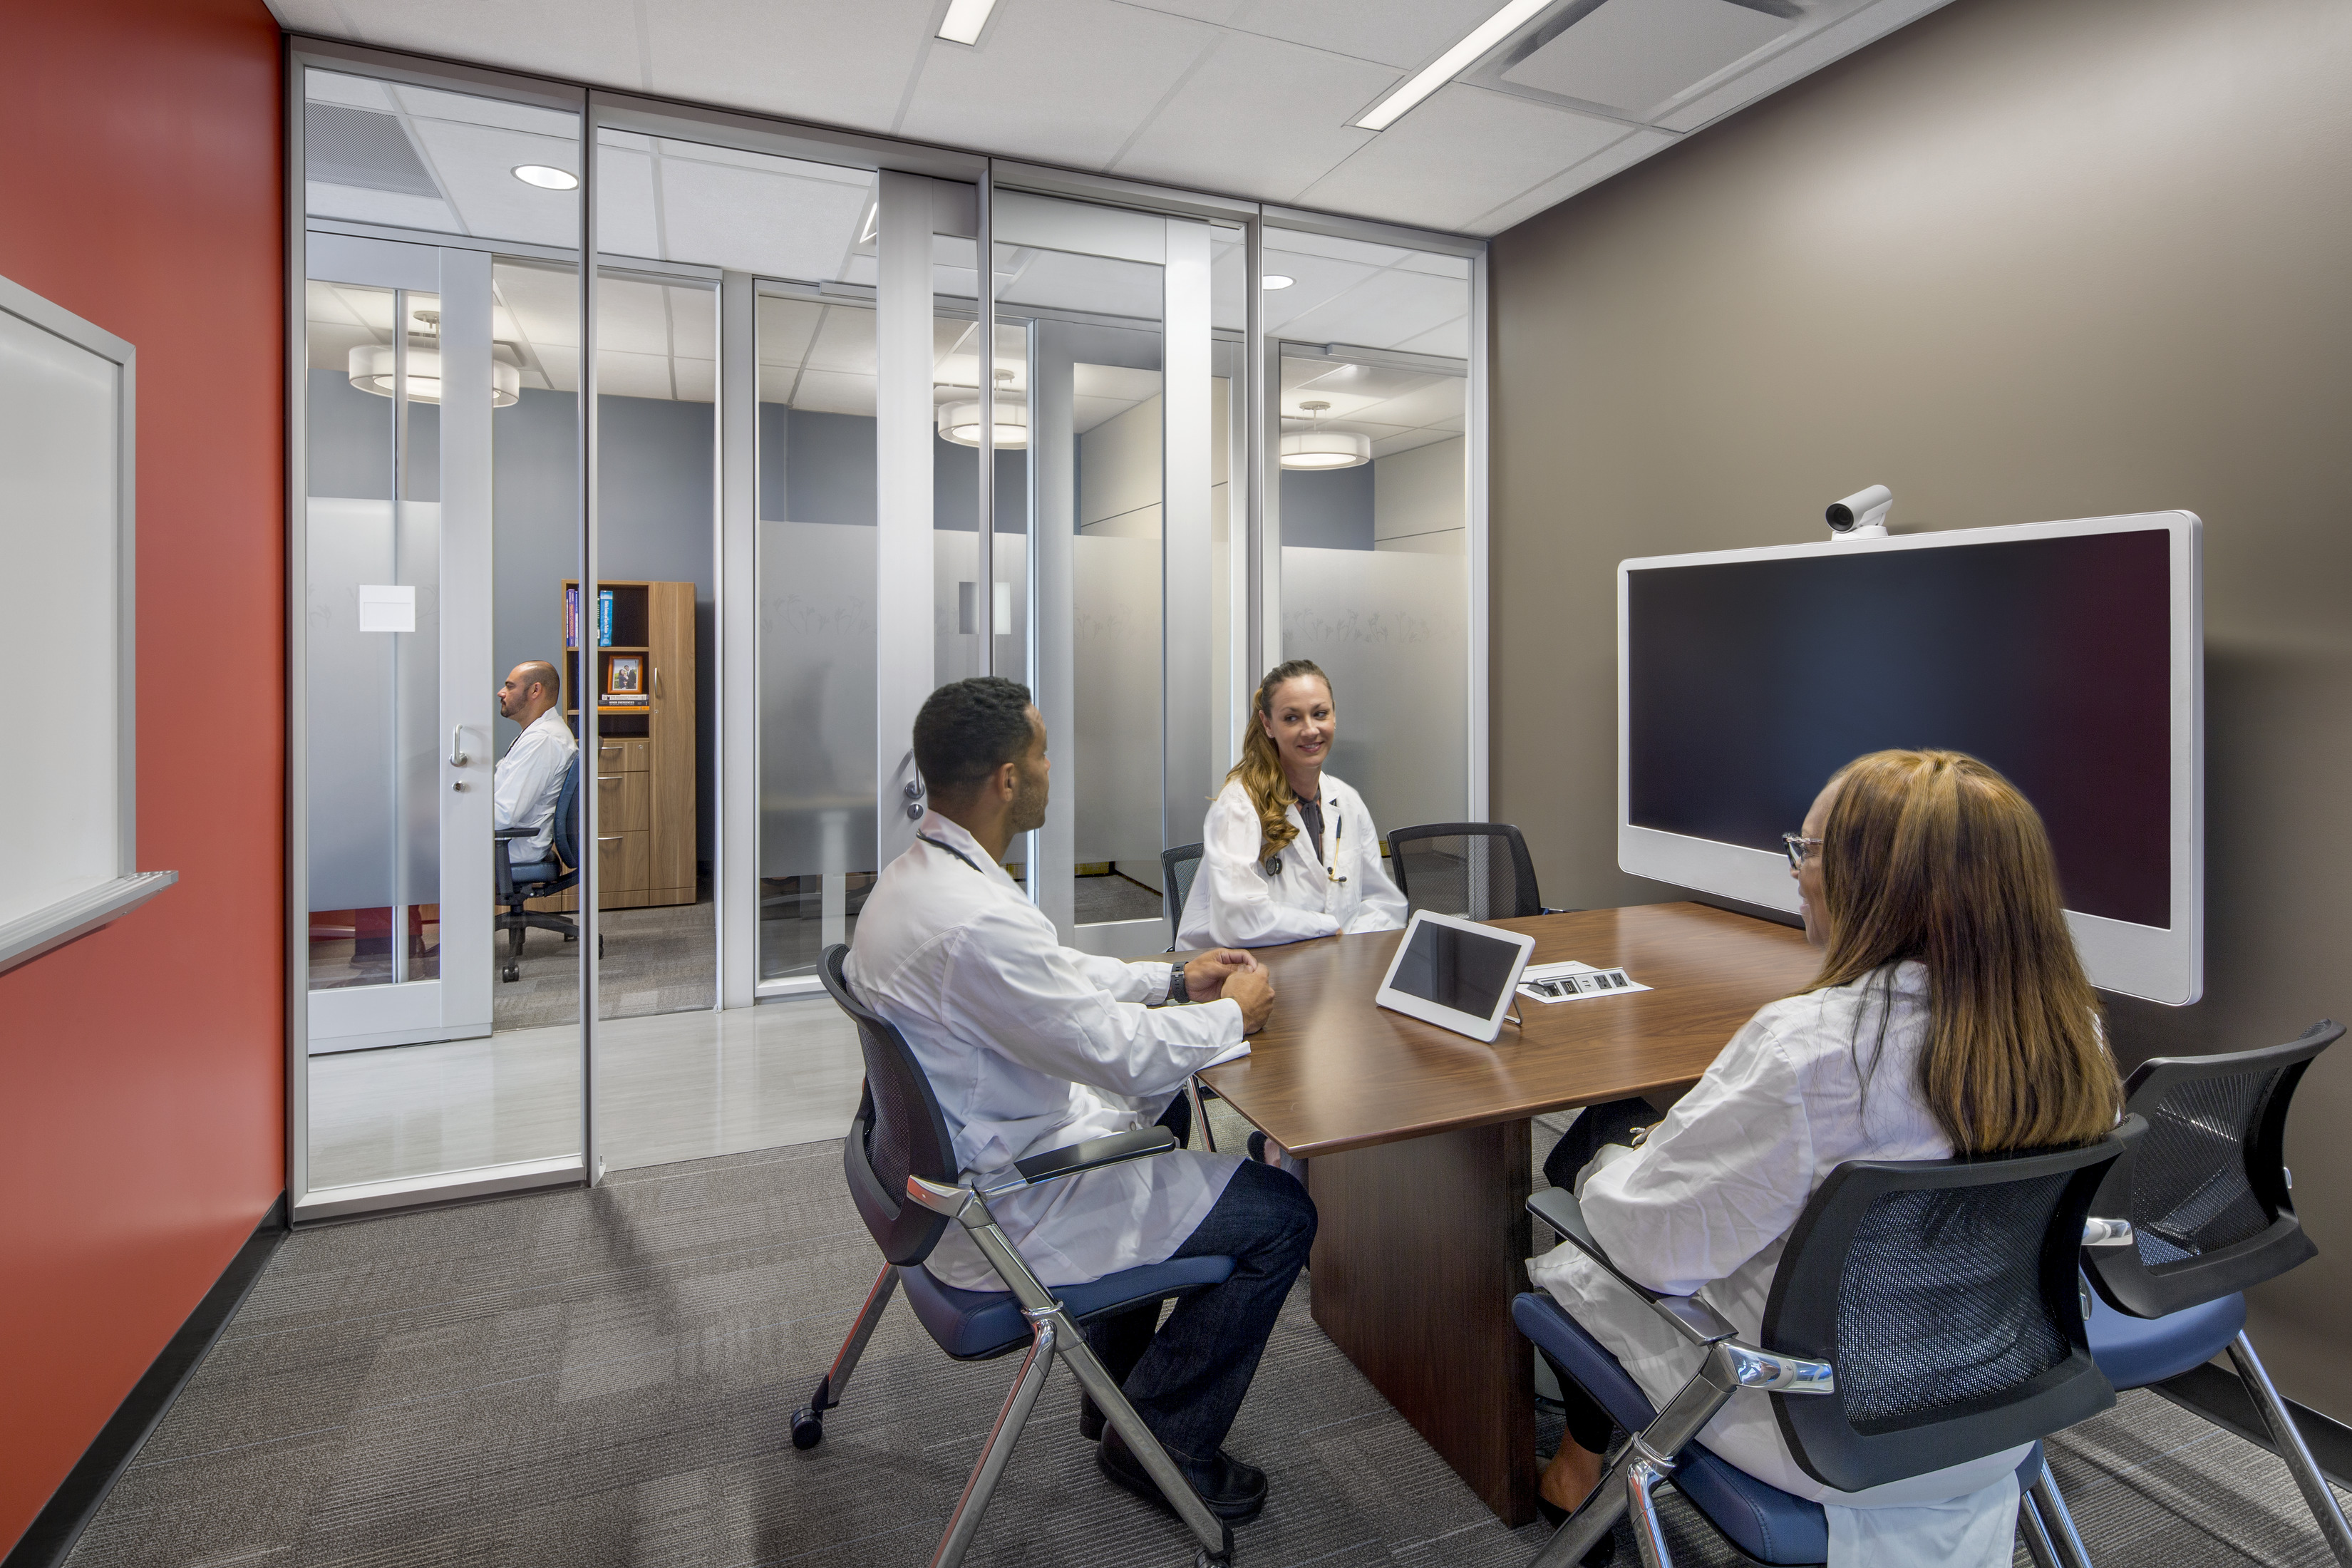 Healthcare data security is a priority at Kaiser Permanente La Habra Medical Office Building.